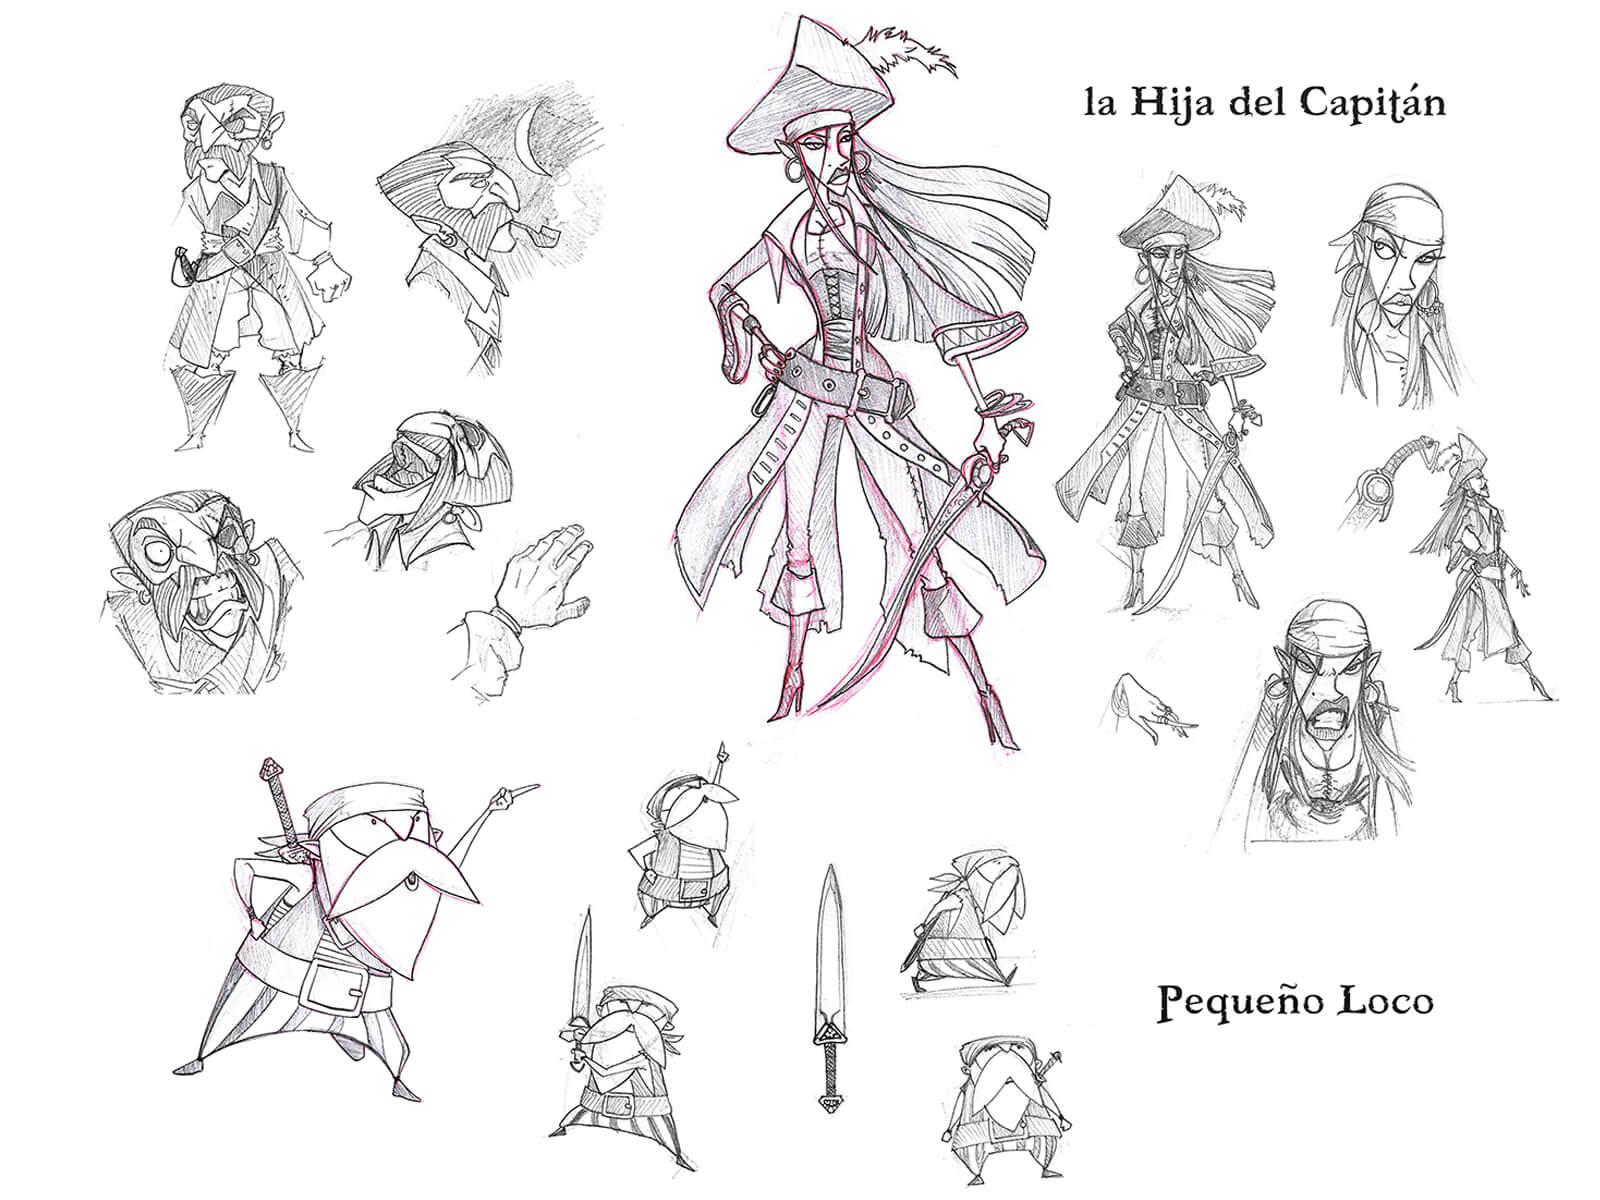 Black-and-white sketches of a pirate captain, his sword-wielding daughter, and an old, short pirate.